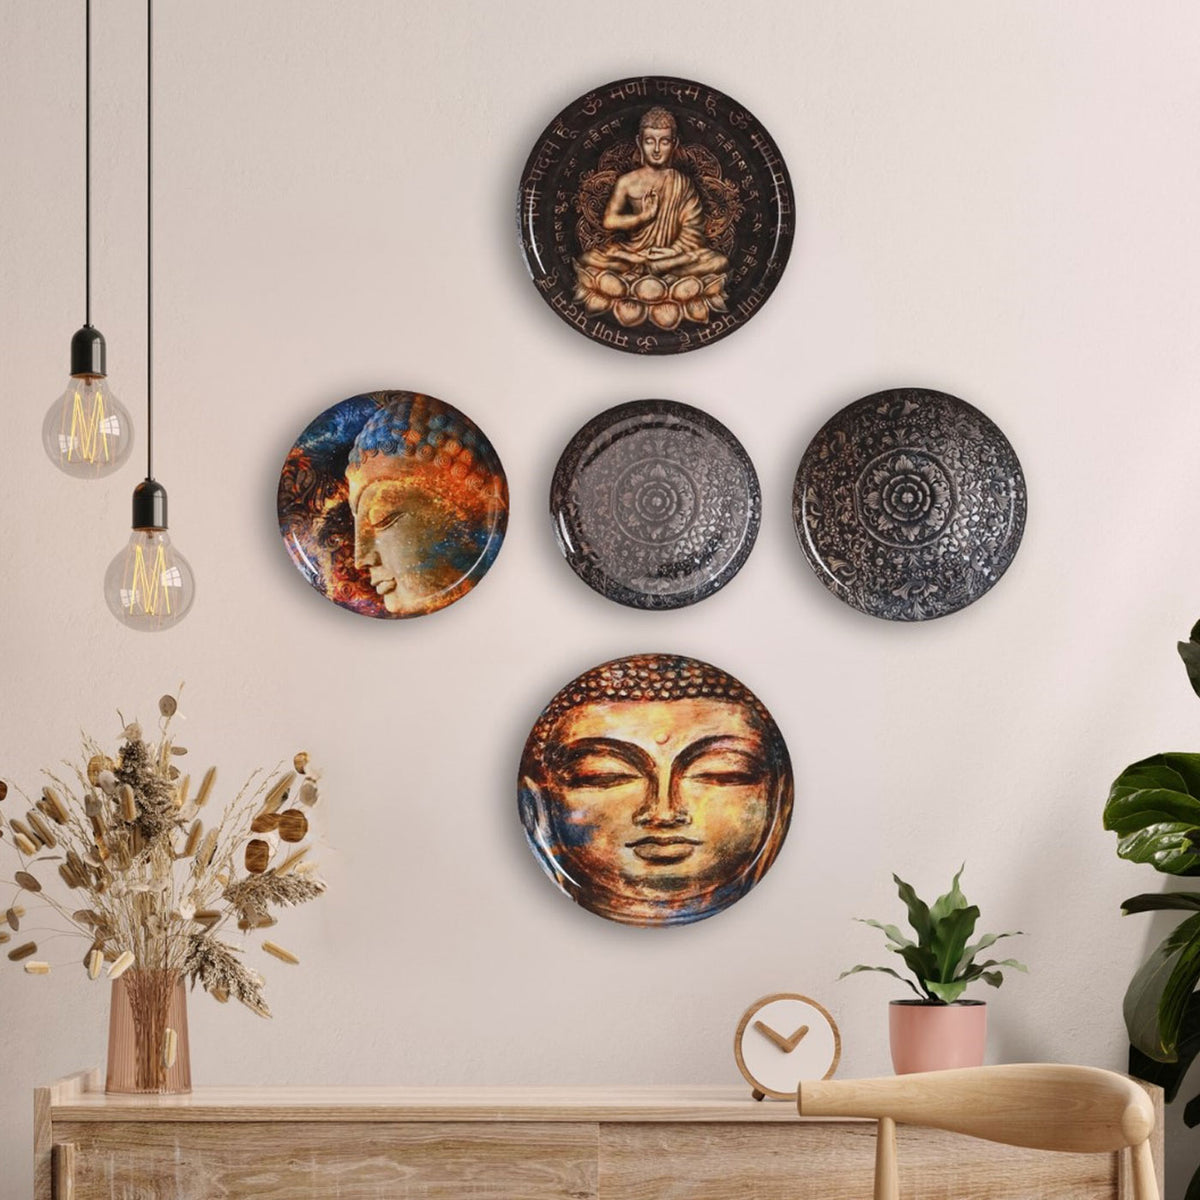 Nirvana Wall Plates- Set of 5(12,11,10,8 inches)